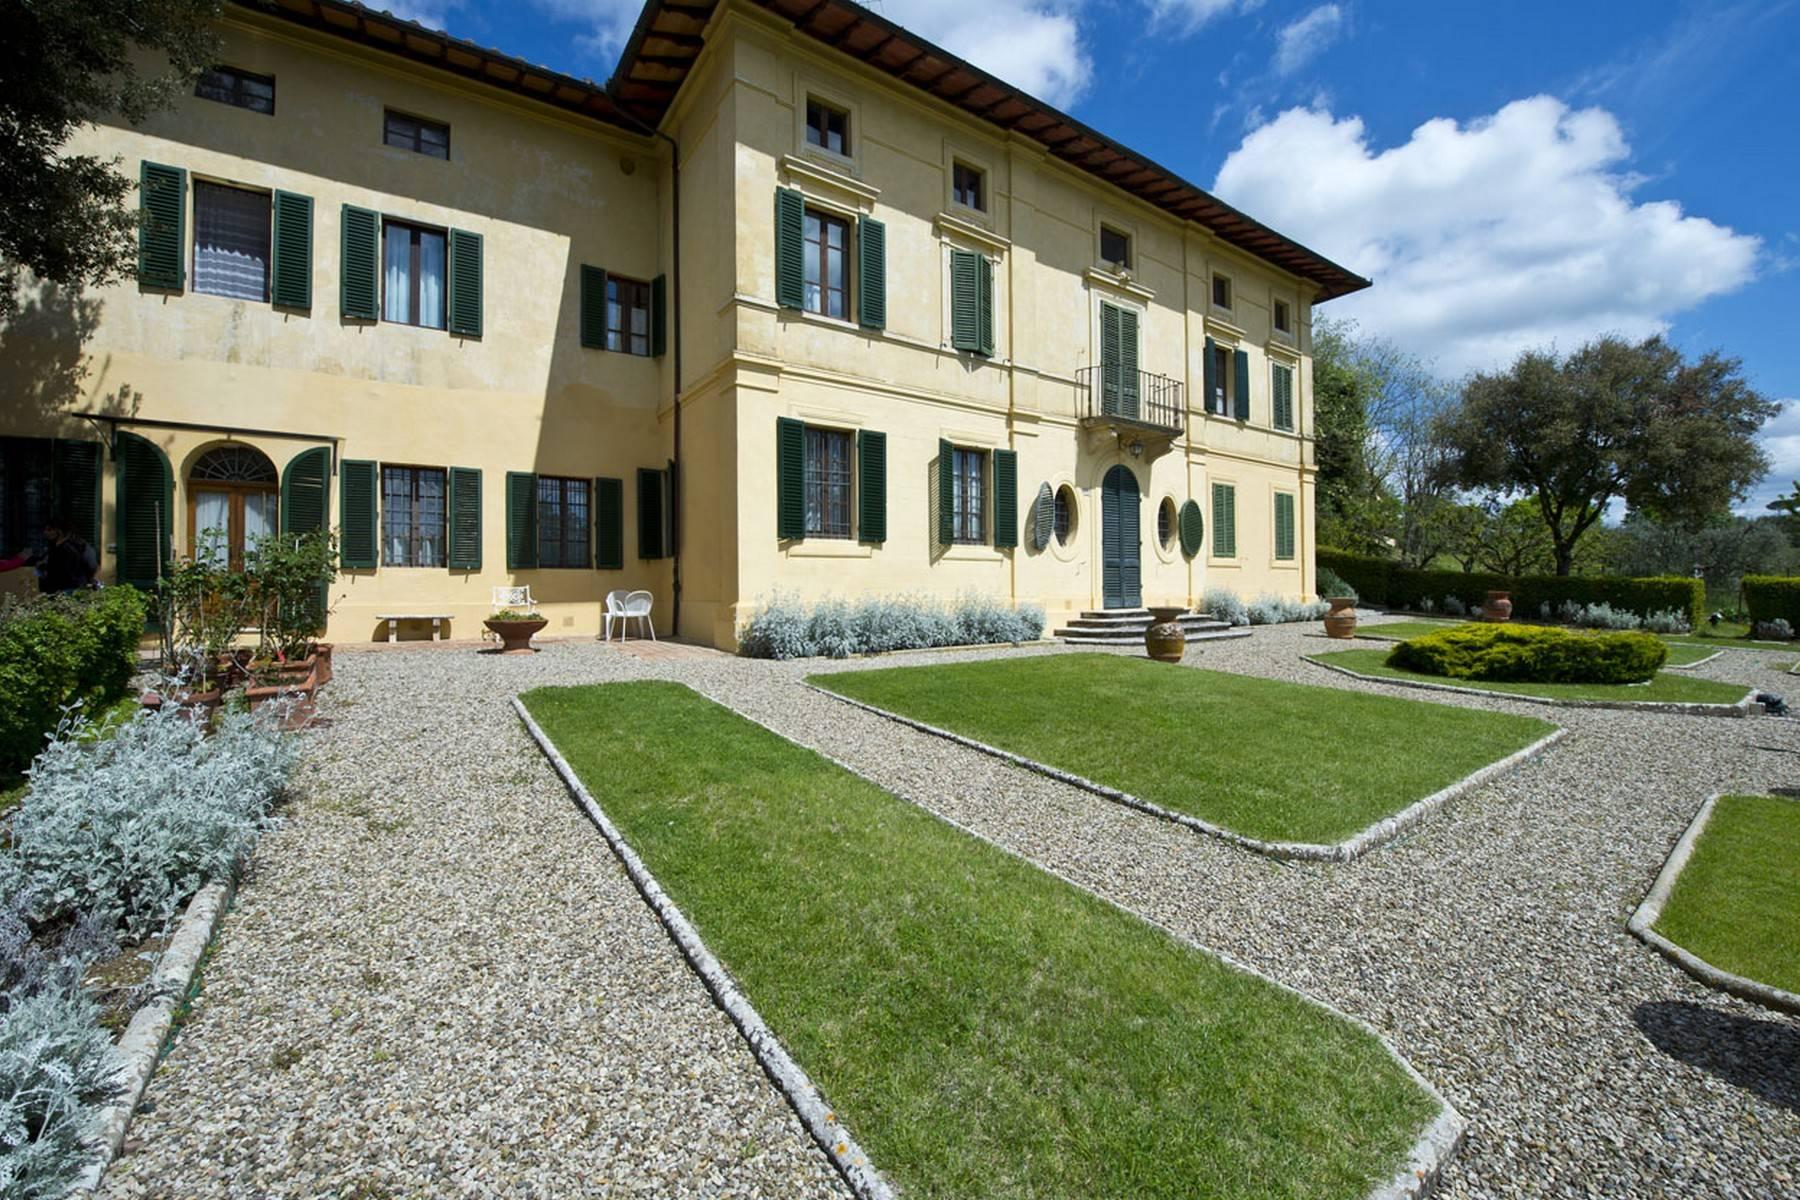 Aristocratic Villa for Sale on the Hills of Siena - 2